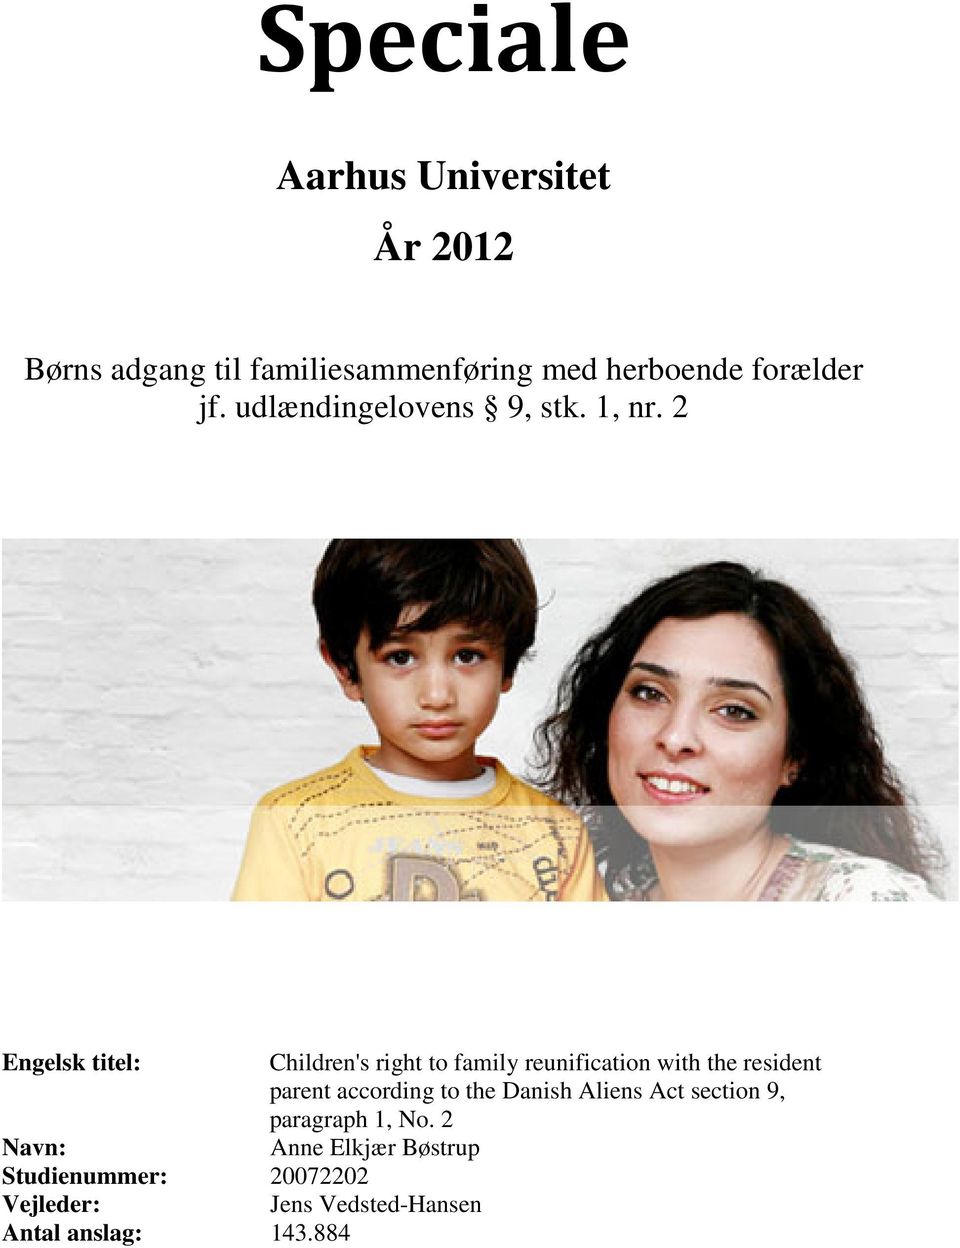 2 Engelsk titel: Children's right to family reunification with the resident parent according